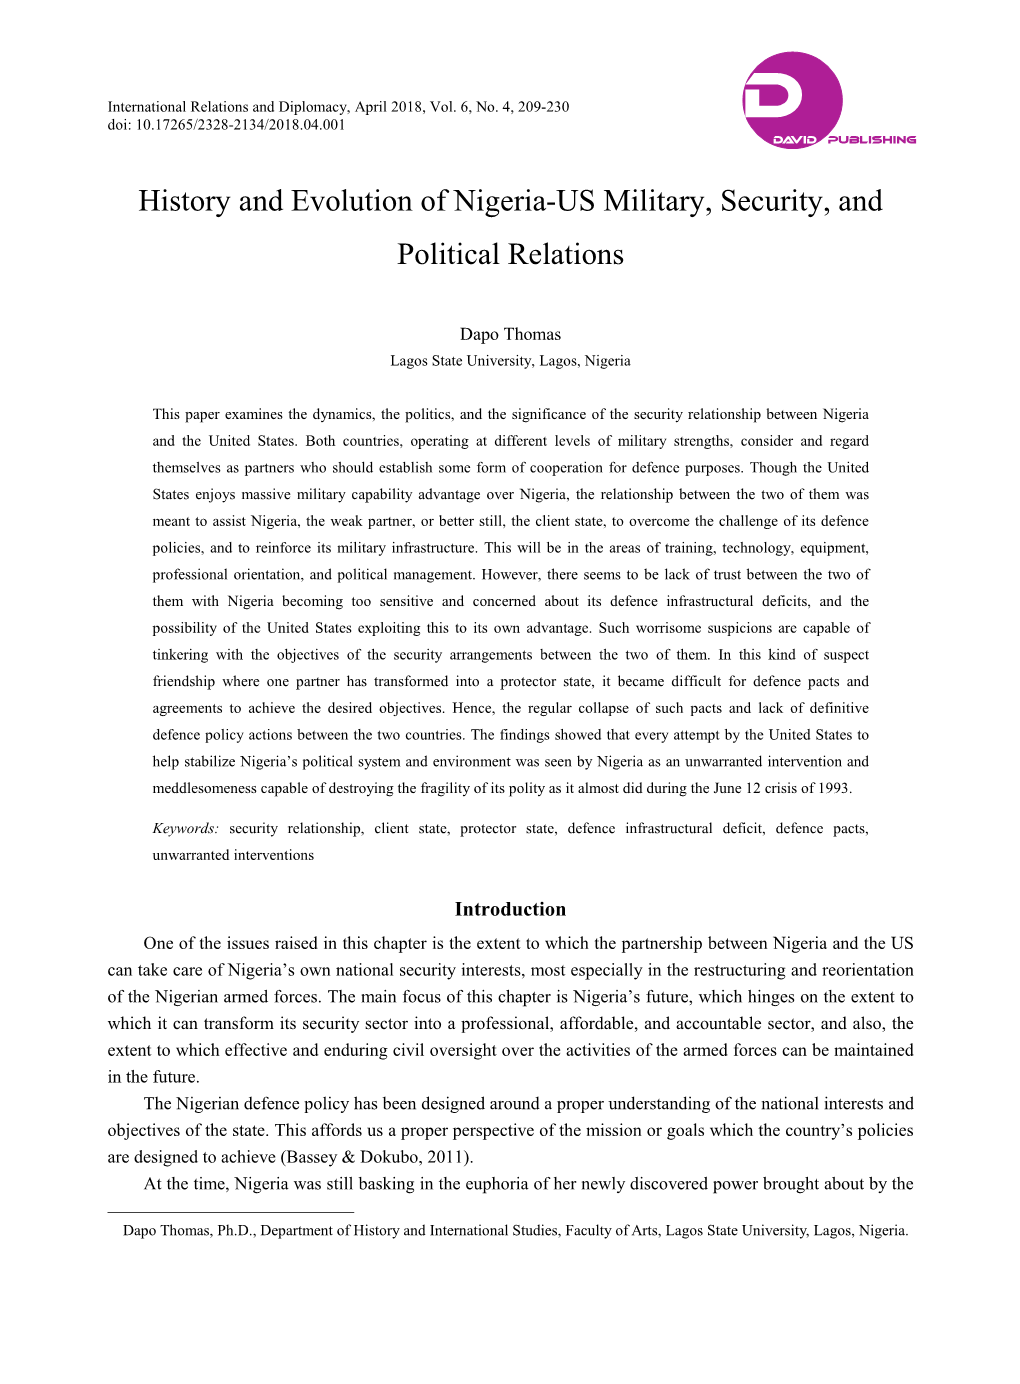 History and Evolution of Nigeria-US Military, Security, and Political Relations